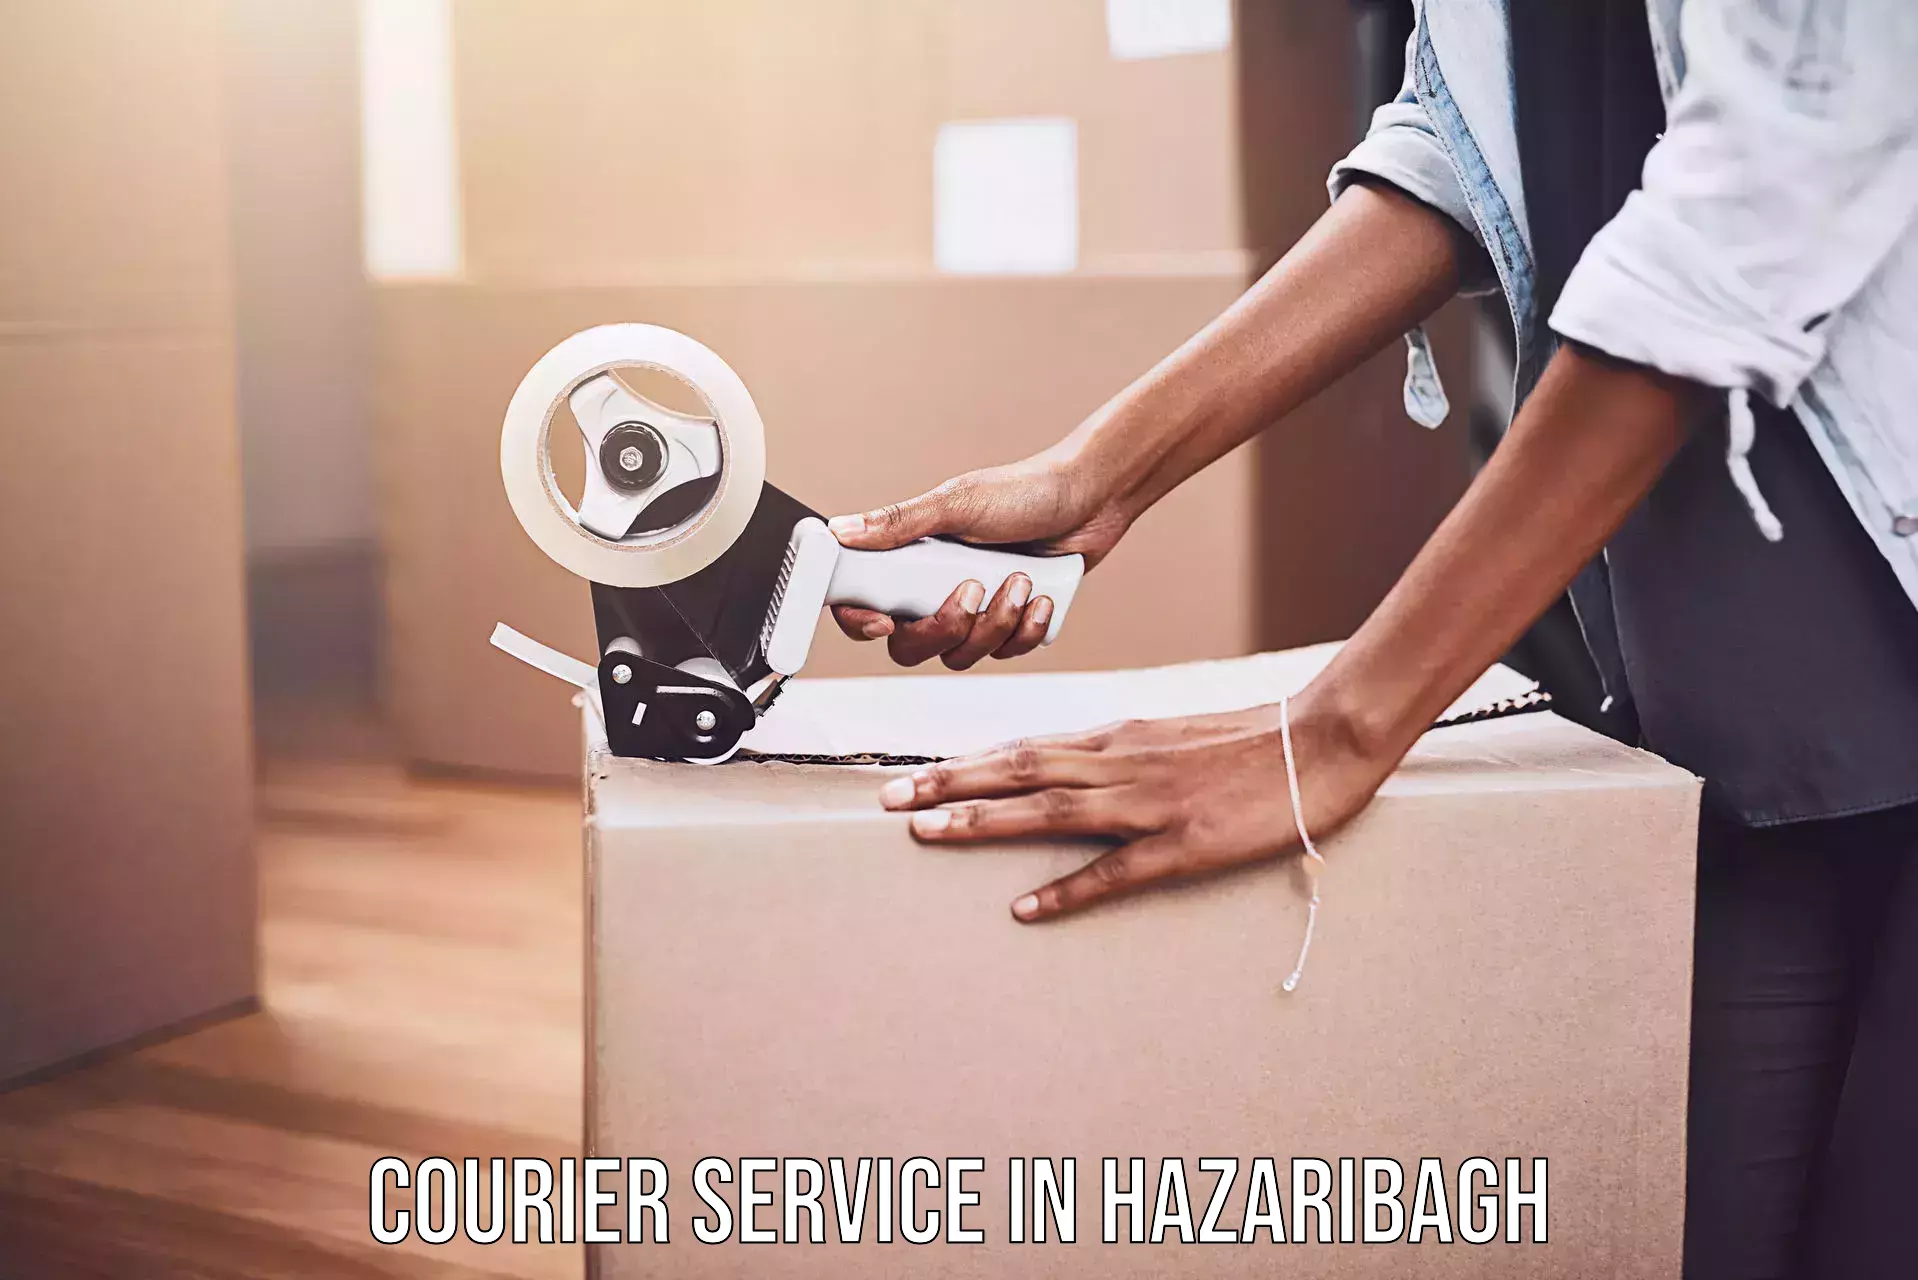 Courier service partnerships in Hazaribagh